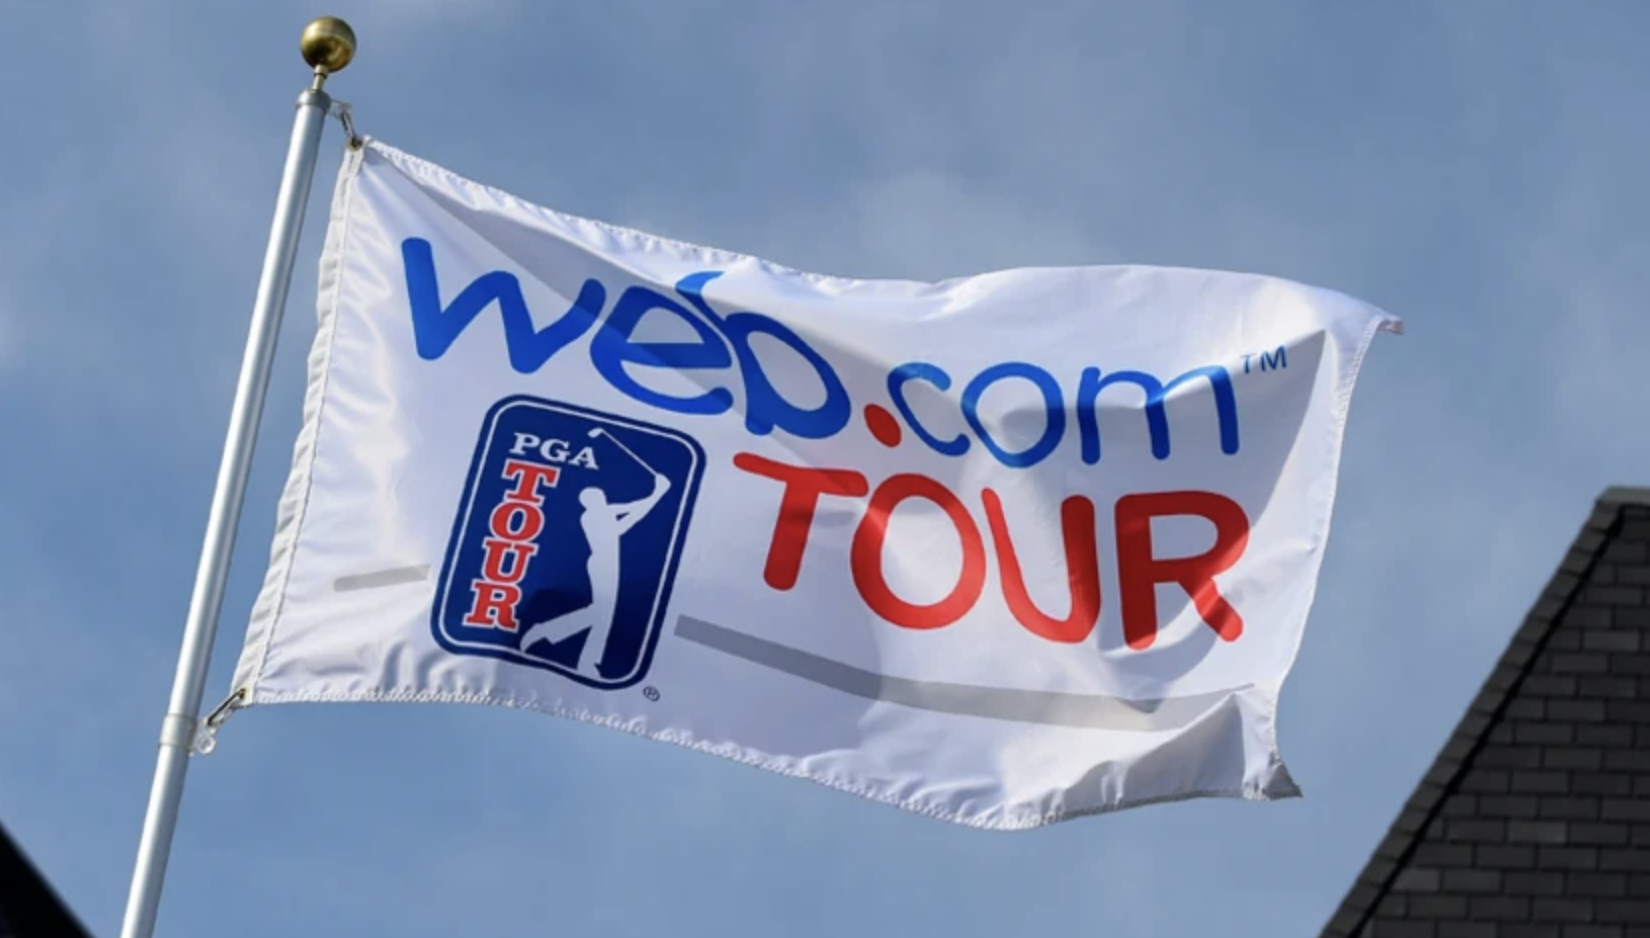 Web.com is no longer the sponsor of the tour that once bore its name.